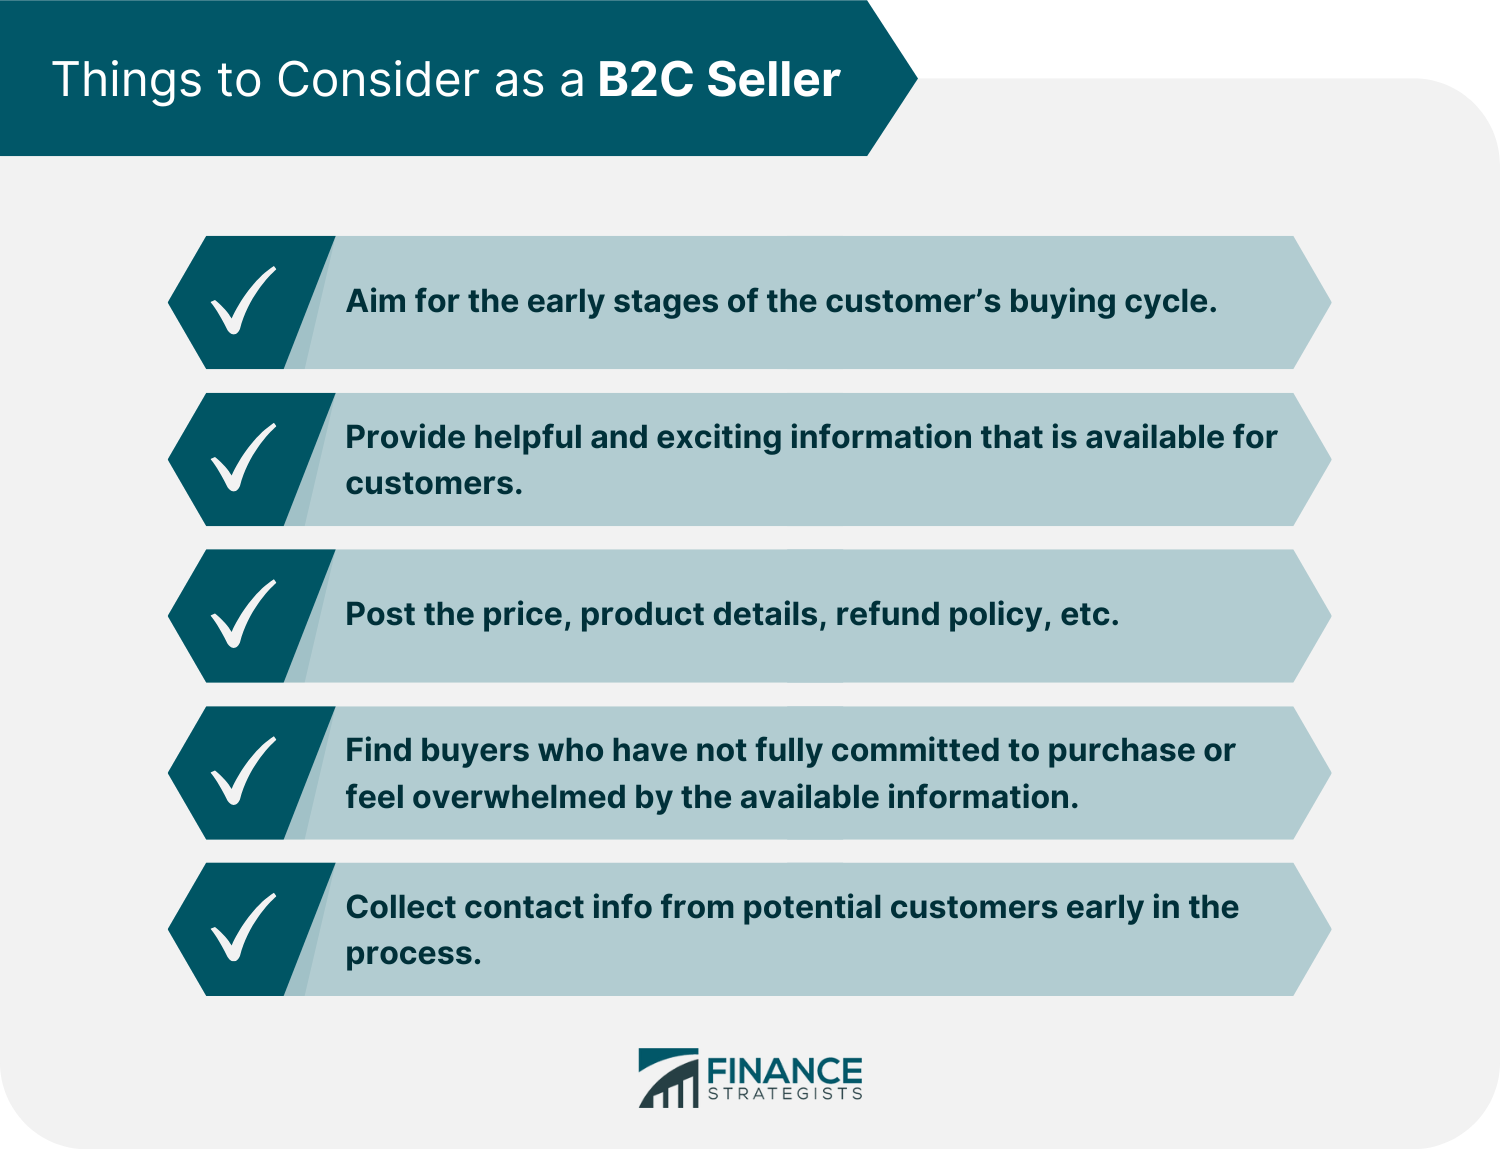 Everything You Should Know About Business-to-Consumer (B2C) Marketing